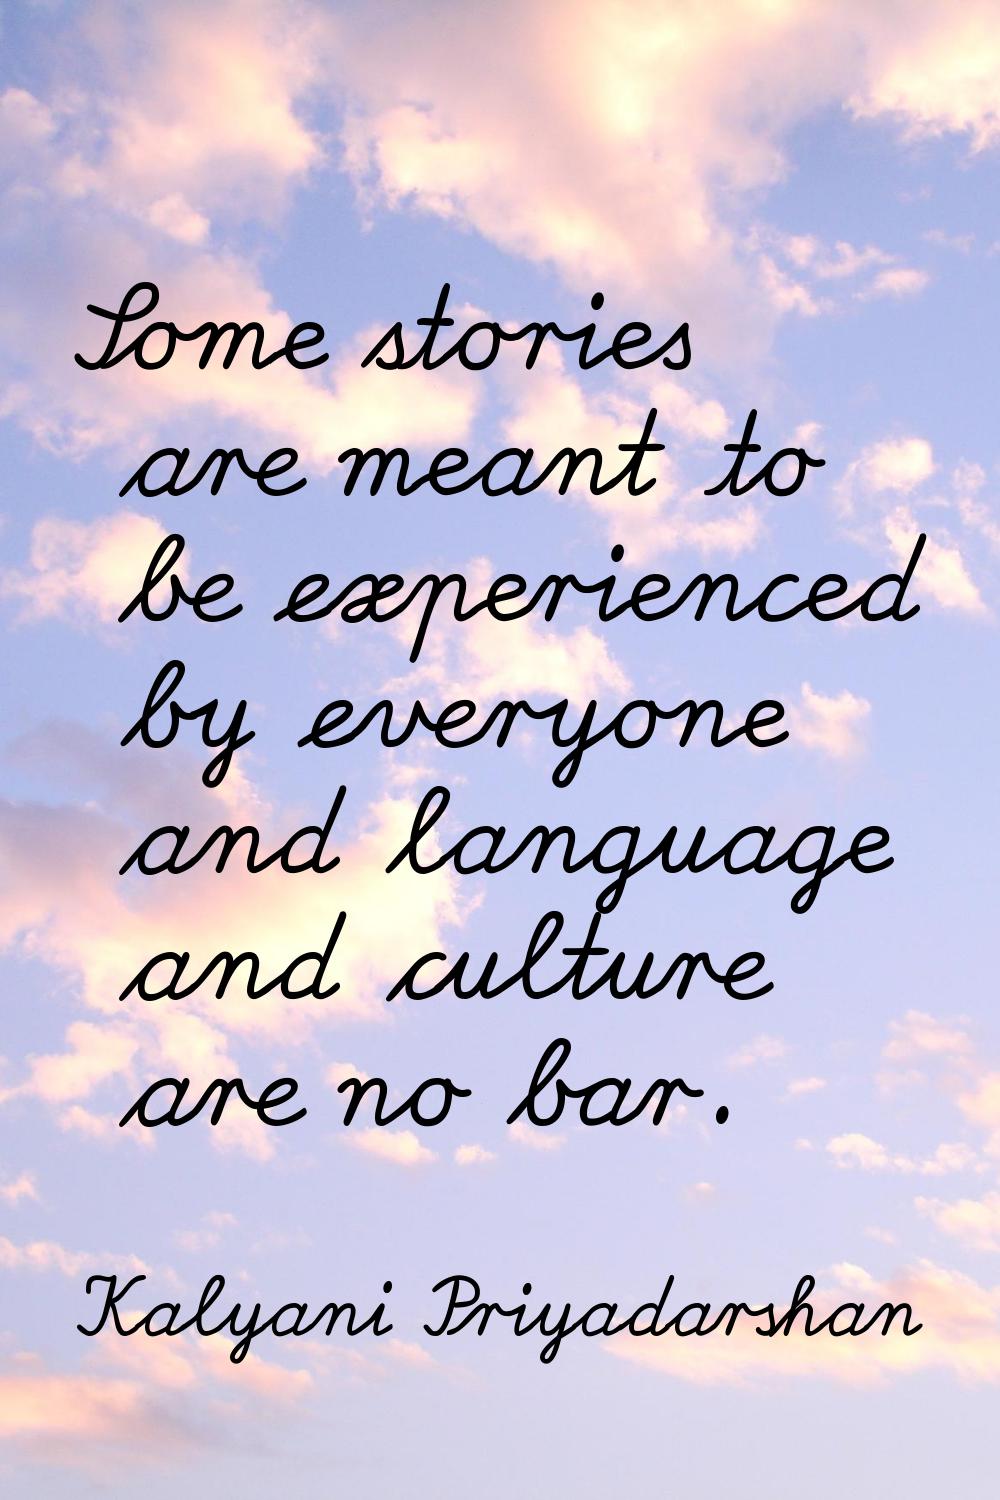 Some stories are meant to be experienced by everyone and language and culture are no bar.